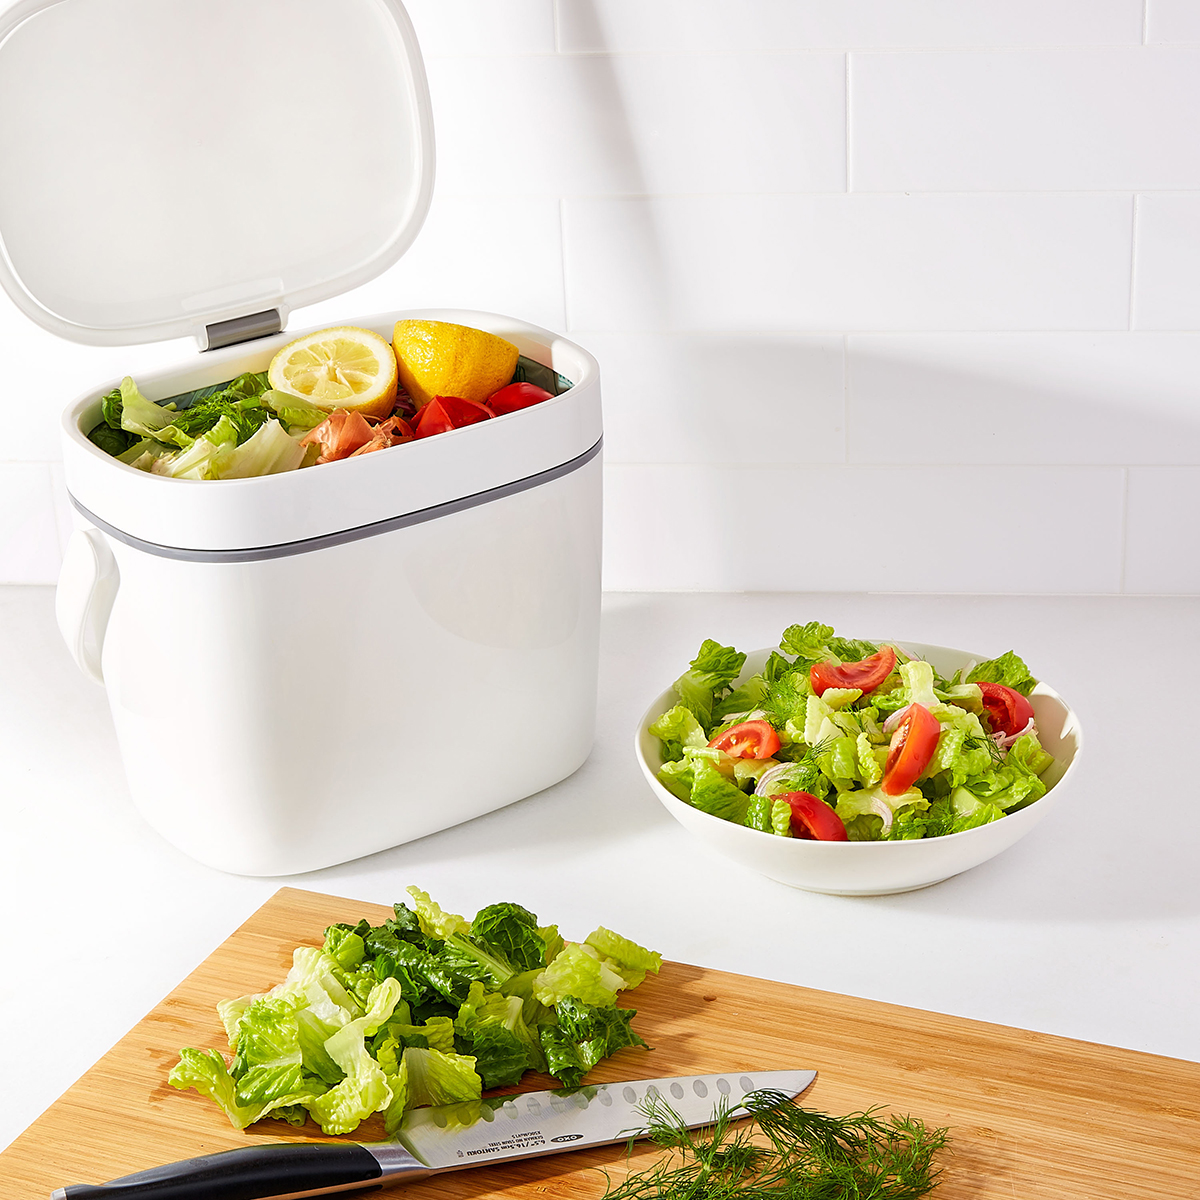 https://www.containerstore.com/catalogimages/479043/10092713-oxo-good-grips-compost-bin-.jpg